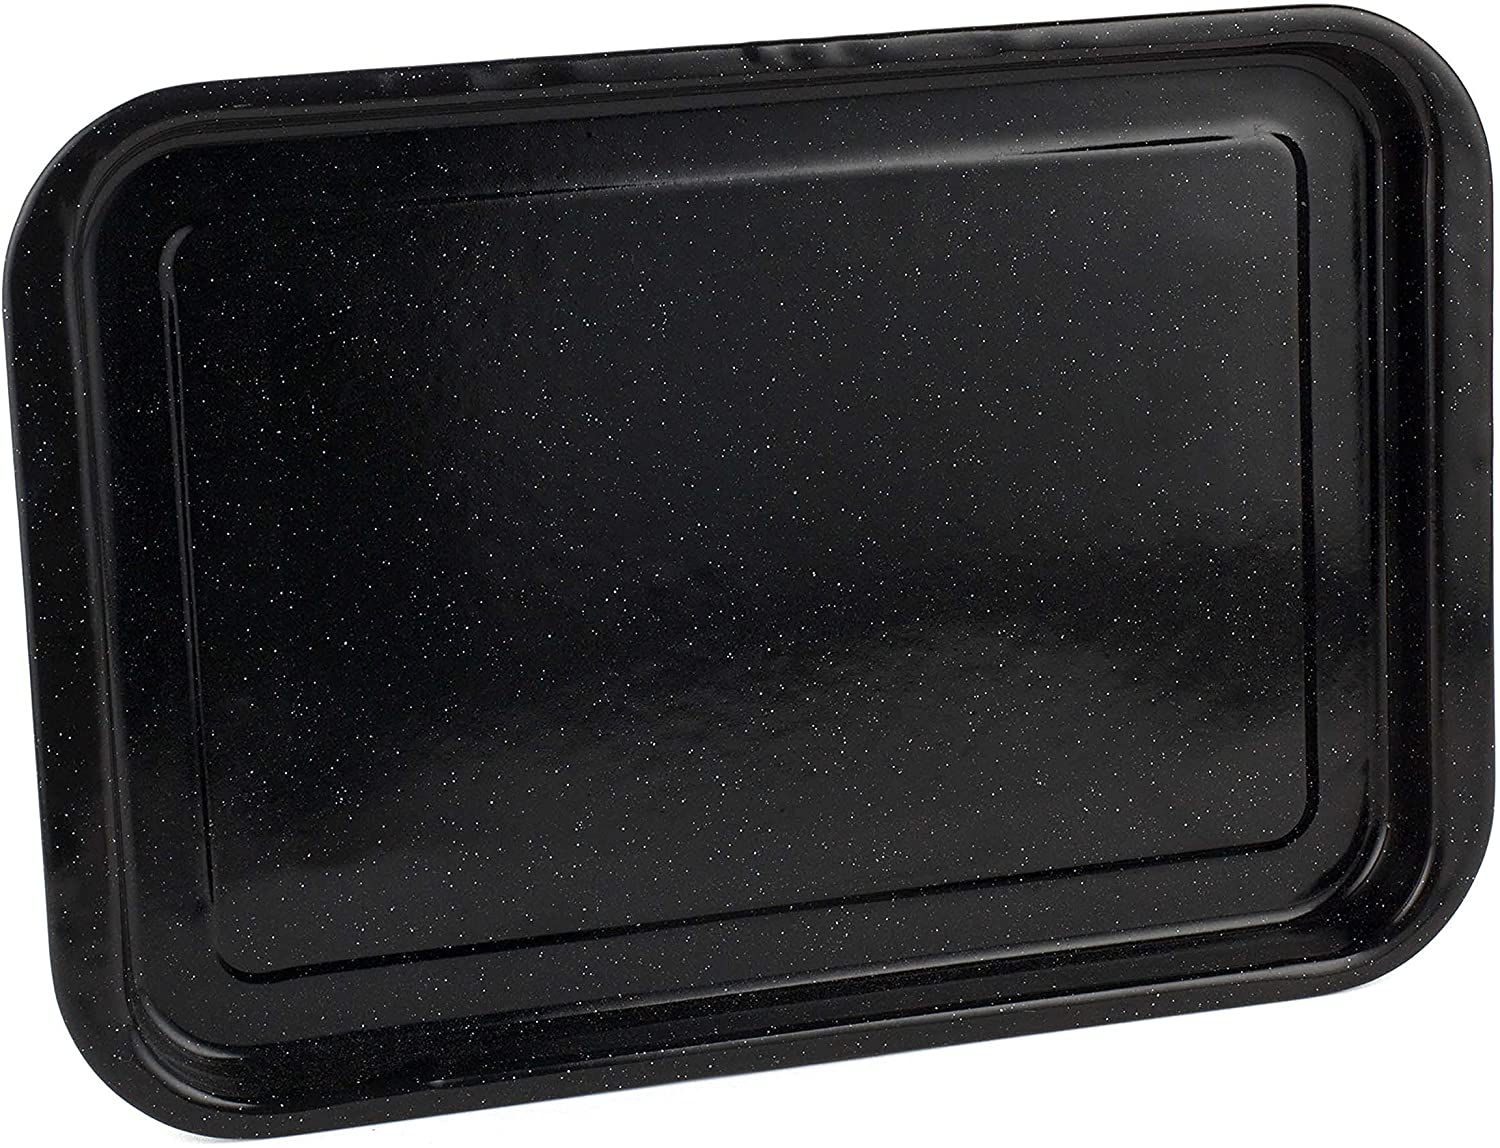 Russell Hobbs CW11471 Romano Vitreous Enamel Baking Tray, 36 cm, Rectangular Oven Tray, Oven Safe up to 230°C/Gas Level 8, Large Non-Stick Baking Tray, Easy to Clean & Dishwasher Safe